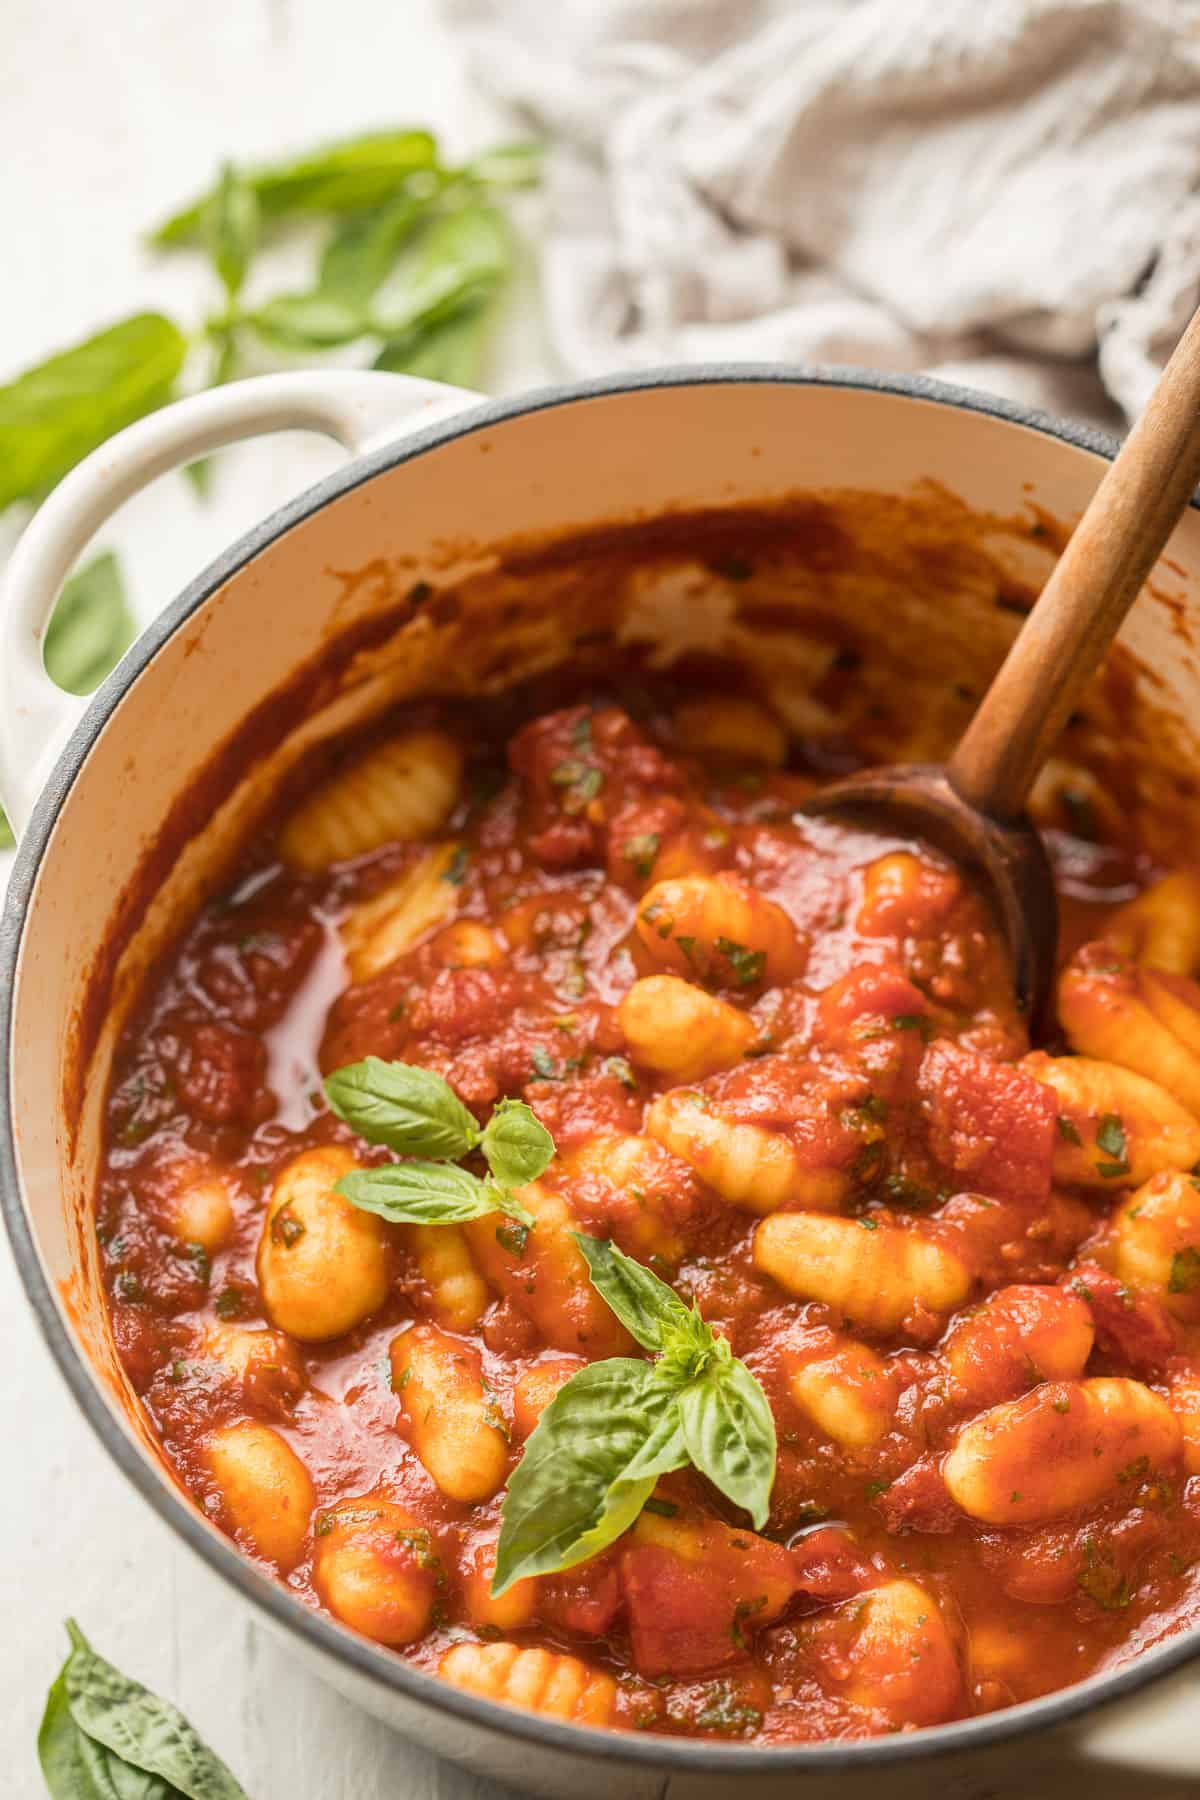 Pot of tomato gnocchi with wooden spoon and fresh basil leaves on top.